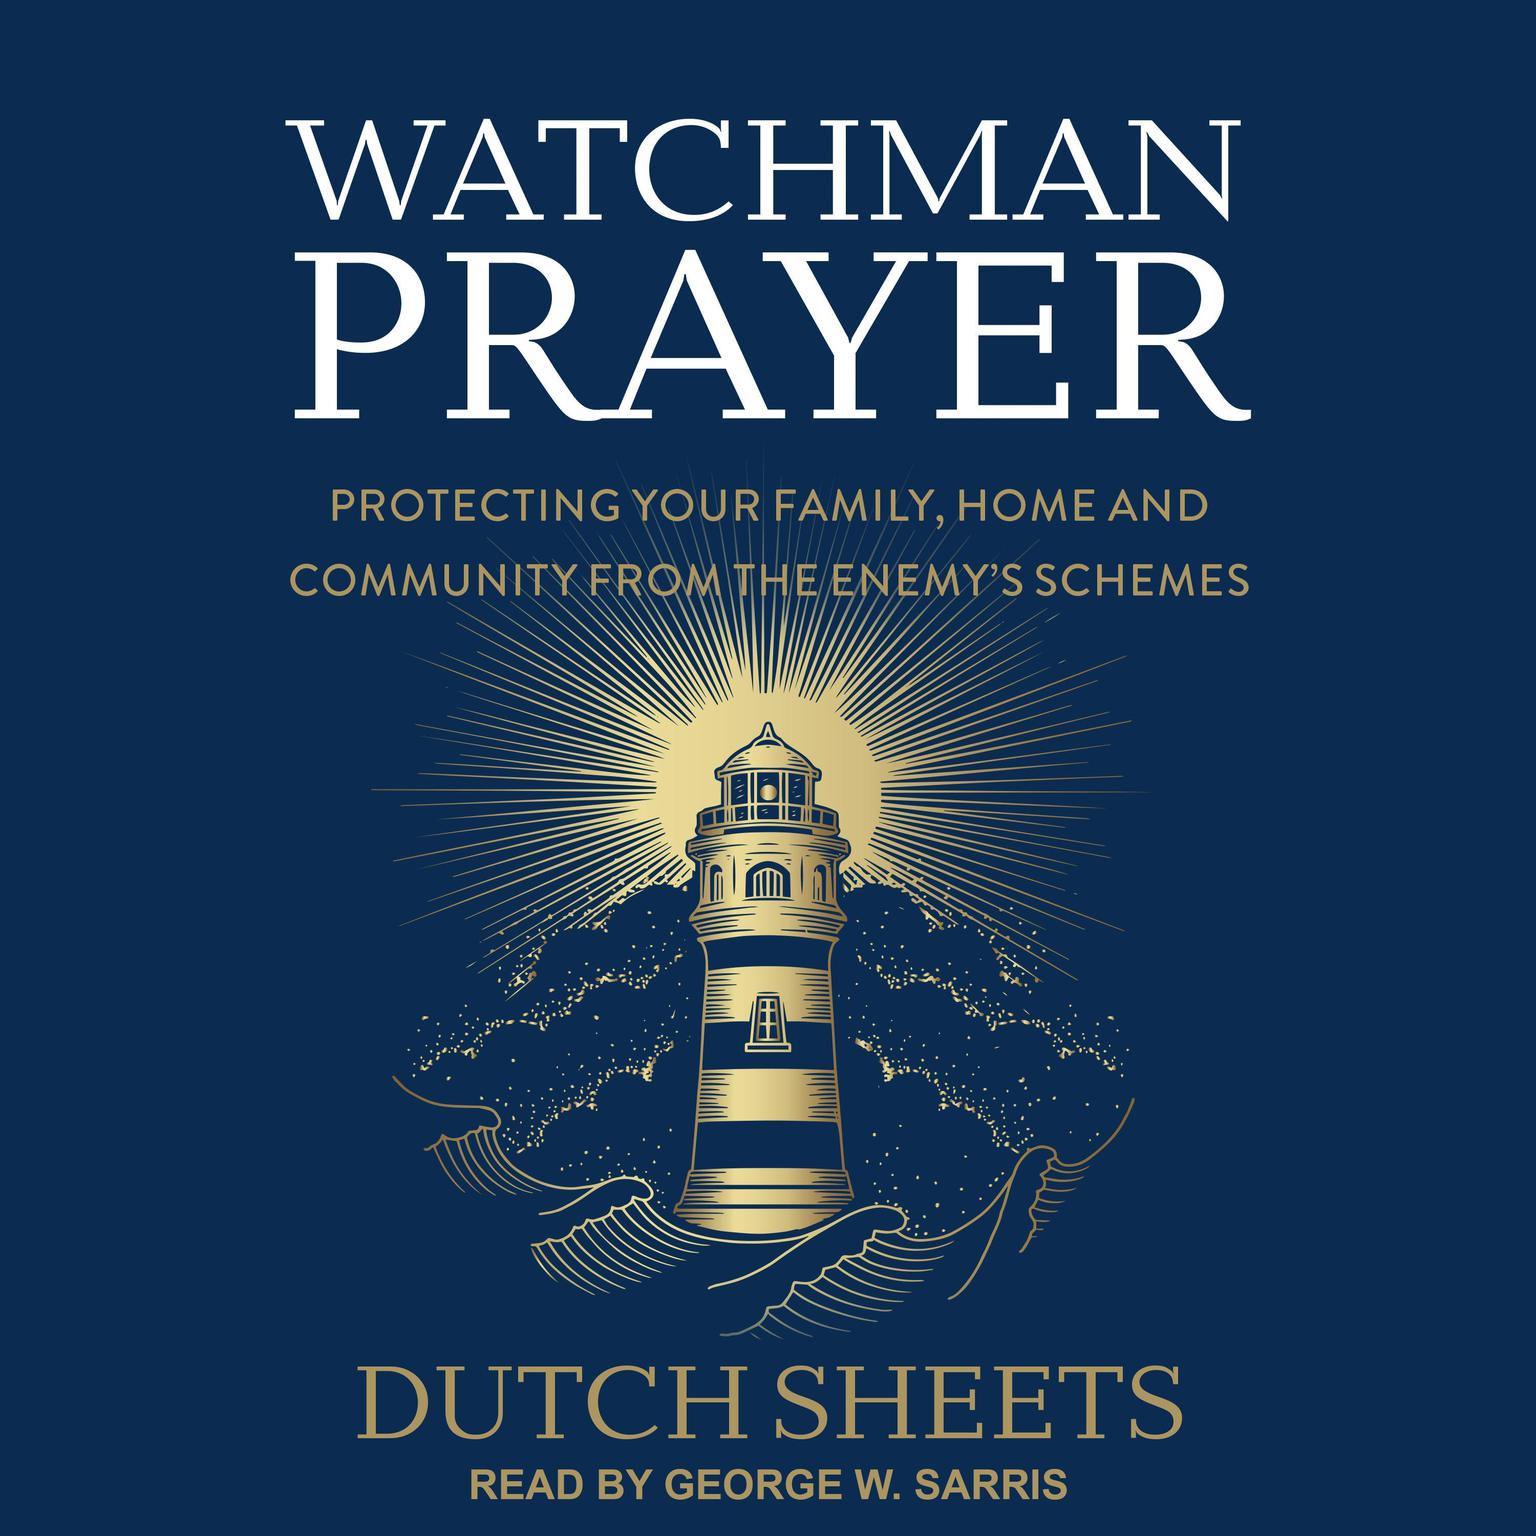 Watchman Prayer: Protecting Your Family, Home and Community from the Enemys Schemes Audiobook, by Dutch Sheets